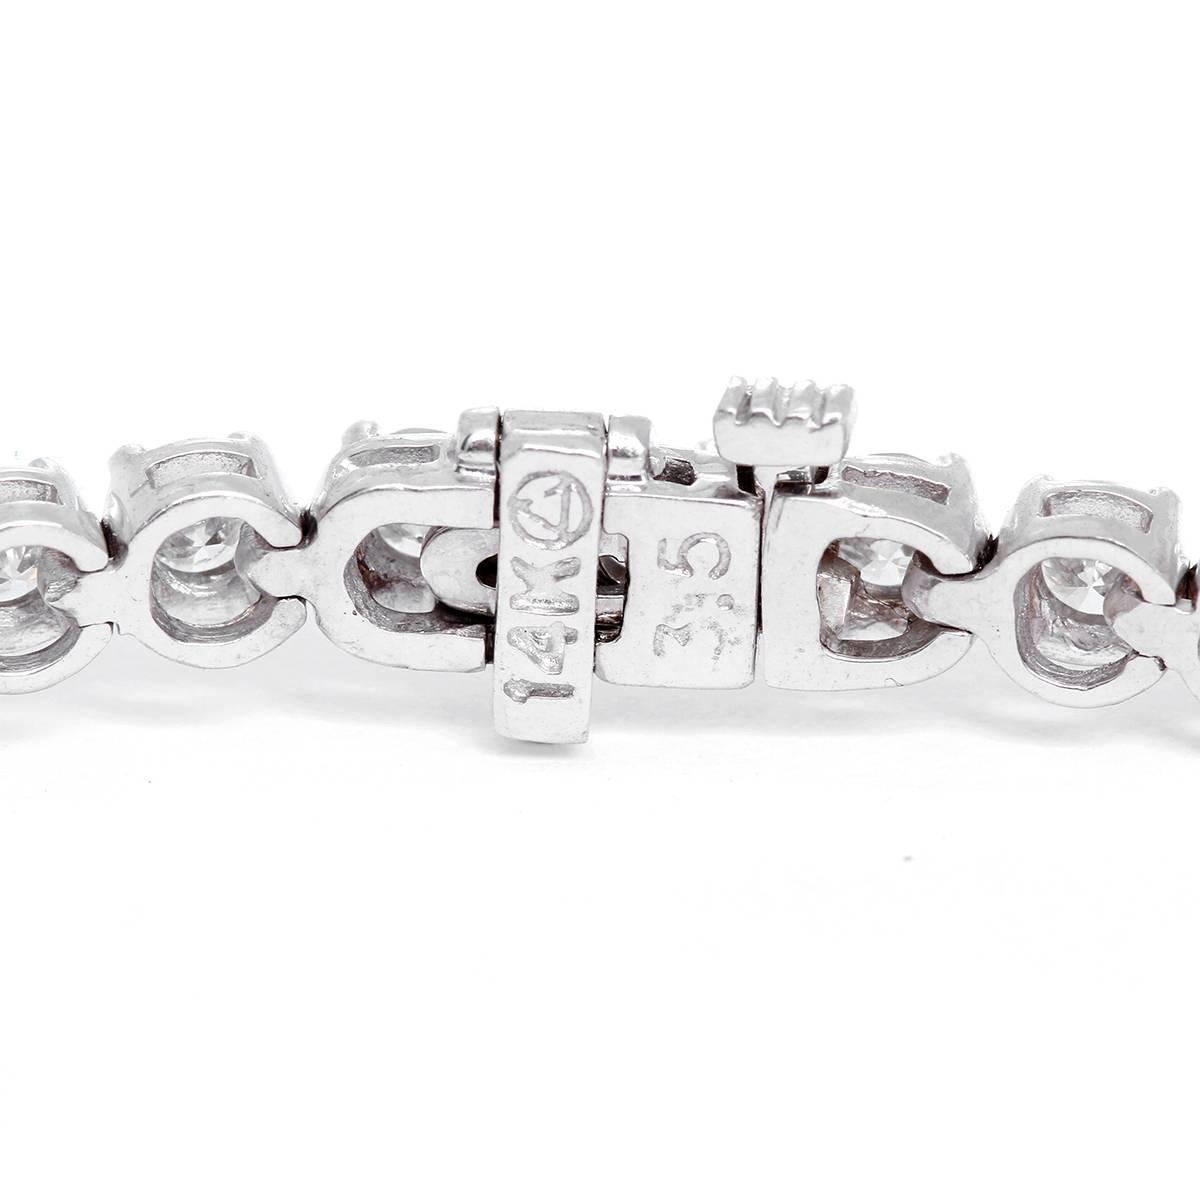 This beautiful bracelet features 6.02 carats of diamonds (HI-color, SI2-SI3 clarity) set in 14k white gold. Bracelet measures apx. 7-inches in length. Total weight is 15.1 grams.